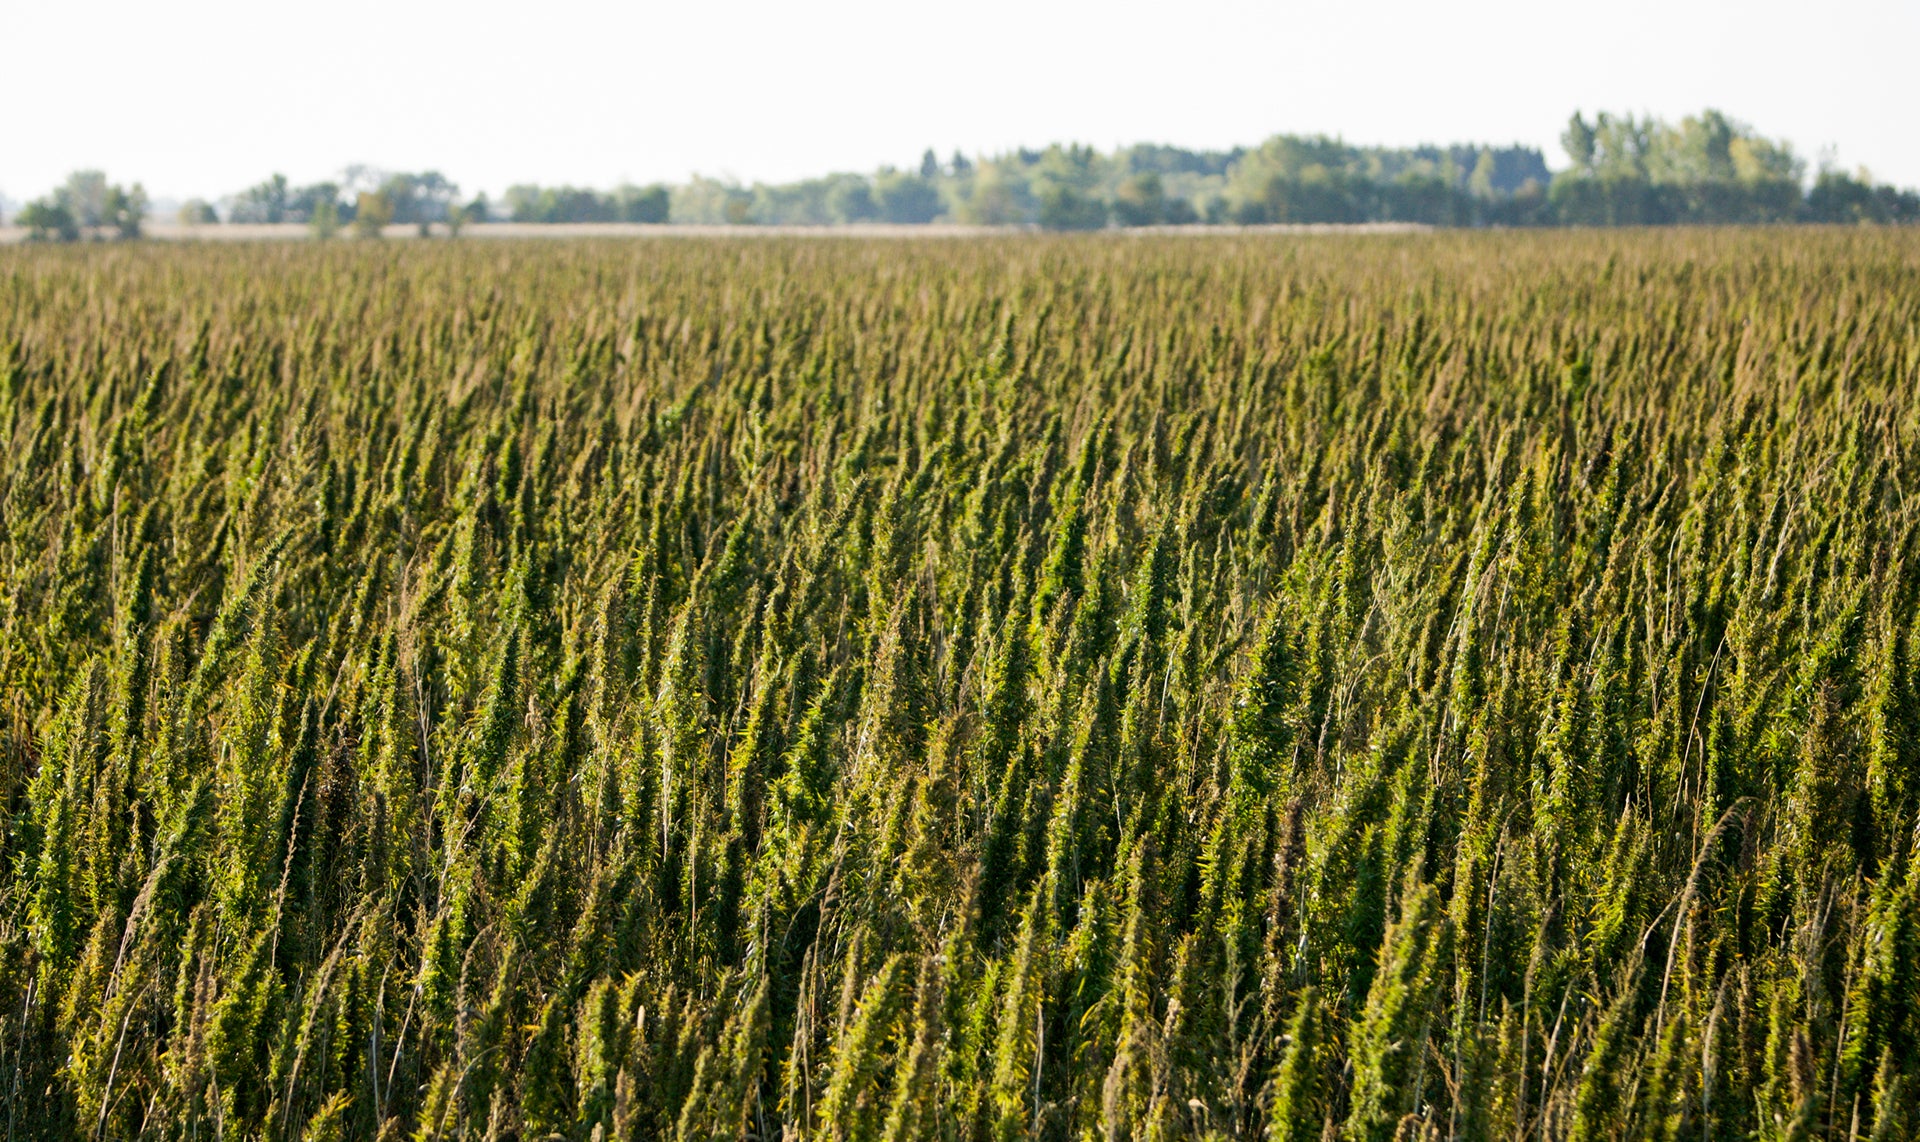 Hemp field cultivated for Oil, Fiber, and seed.